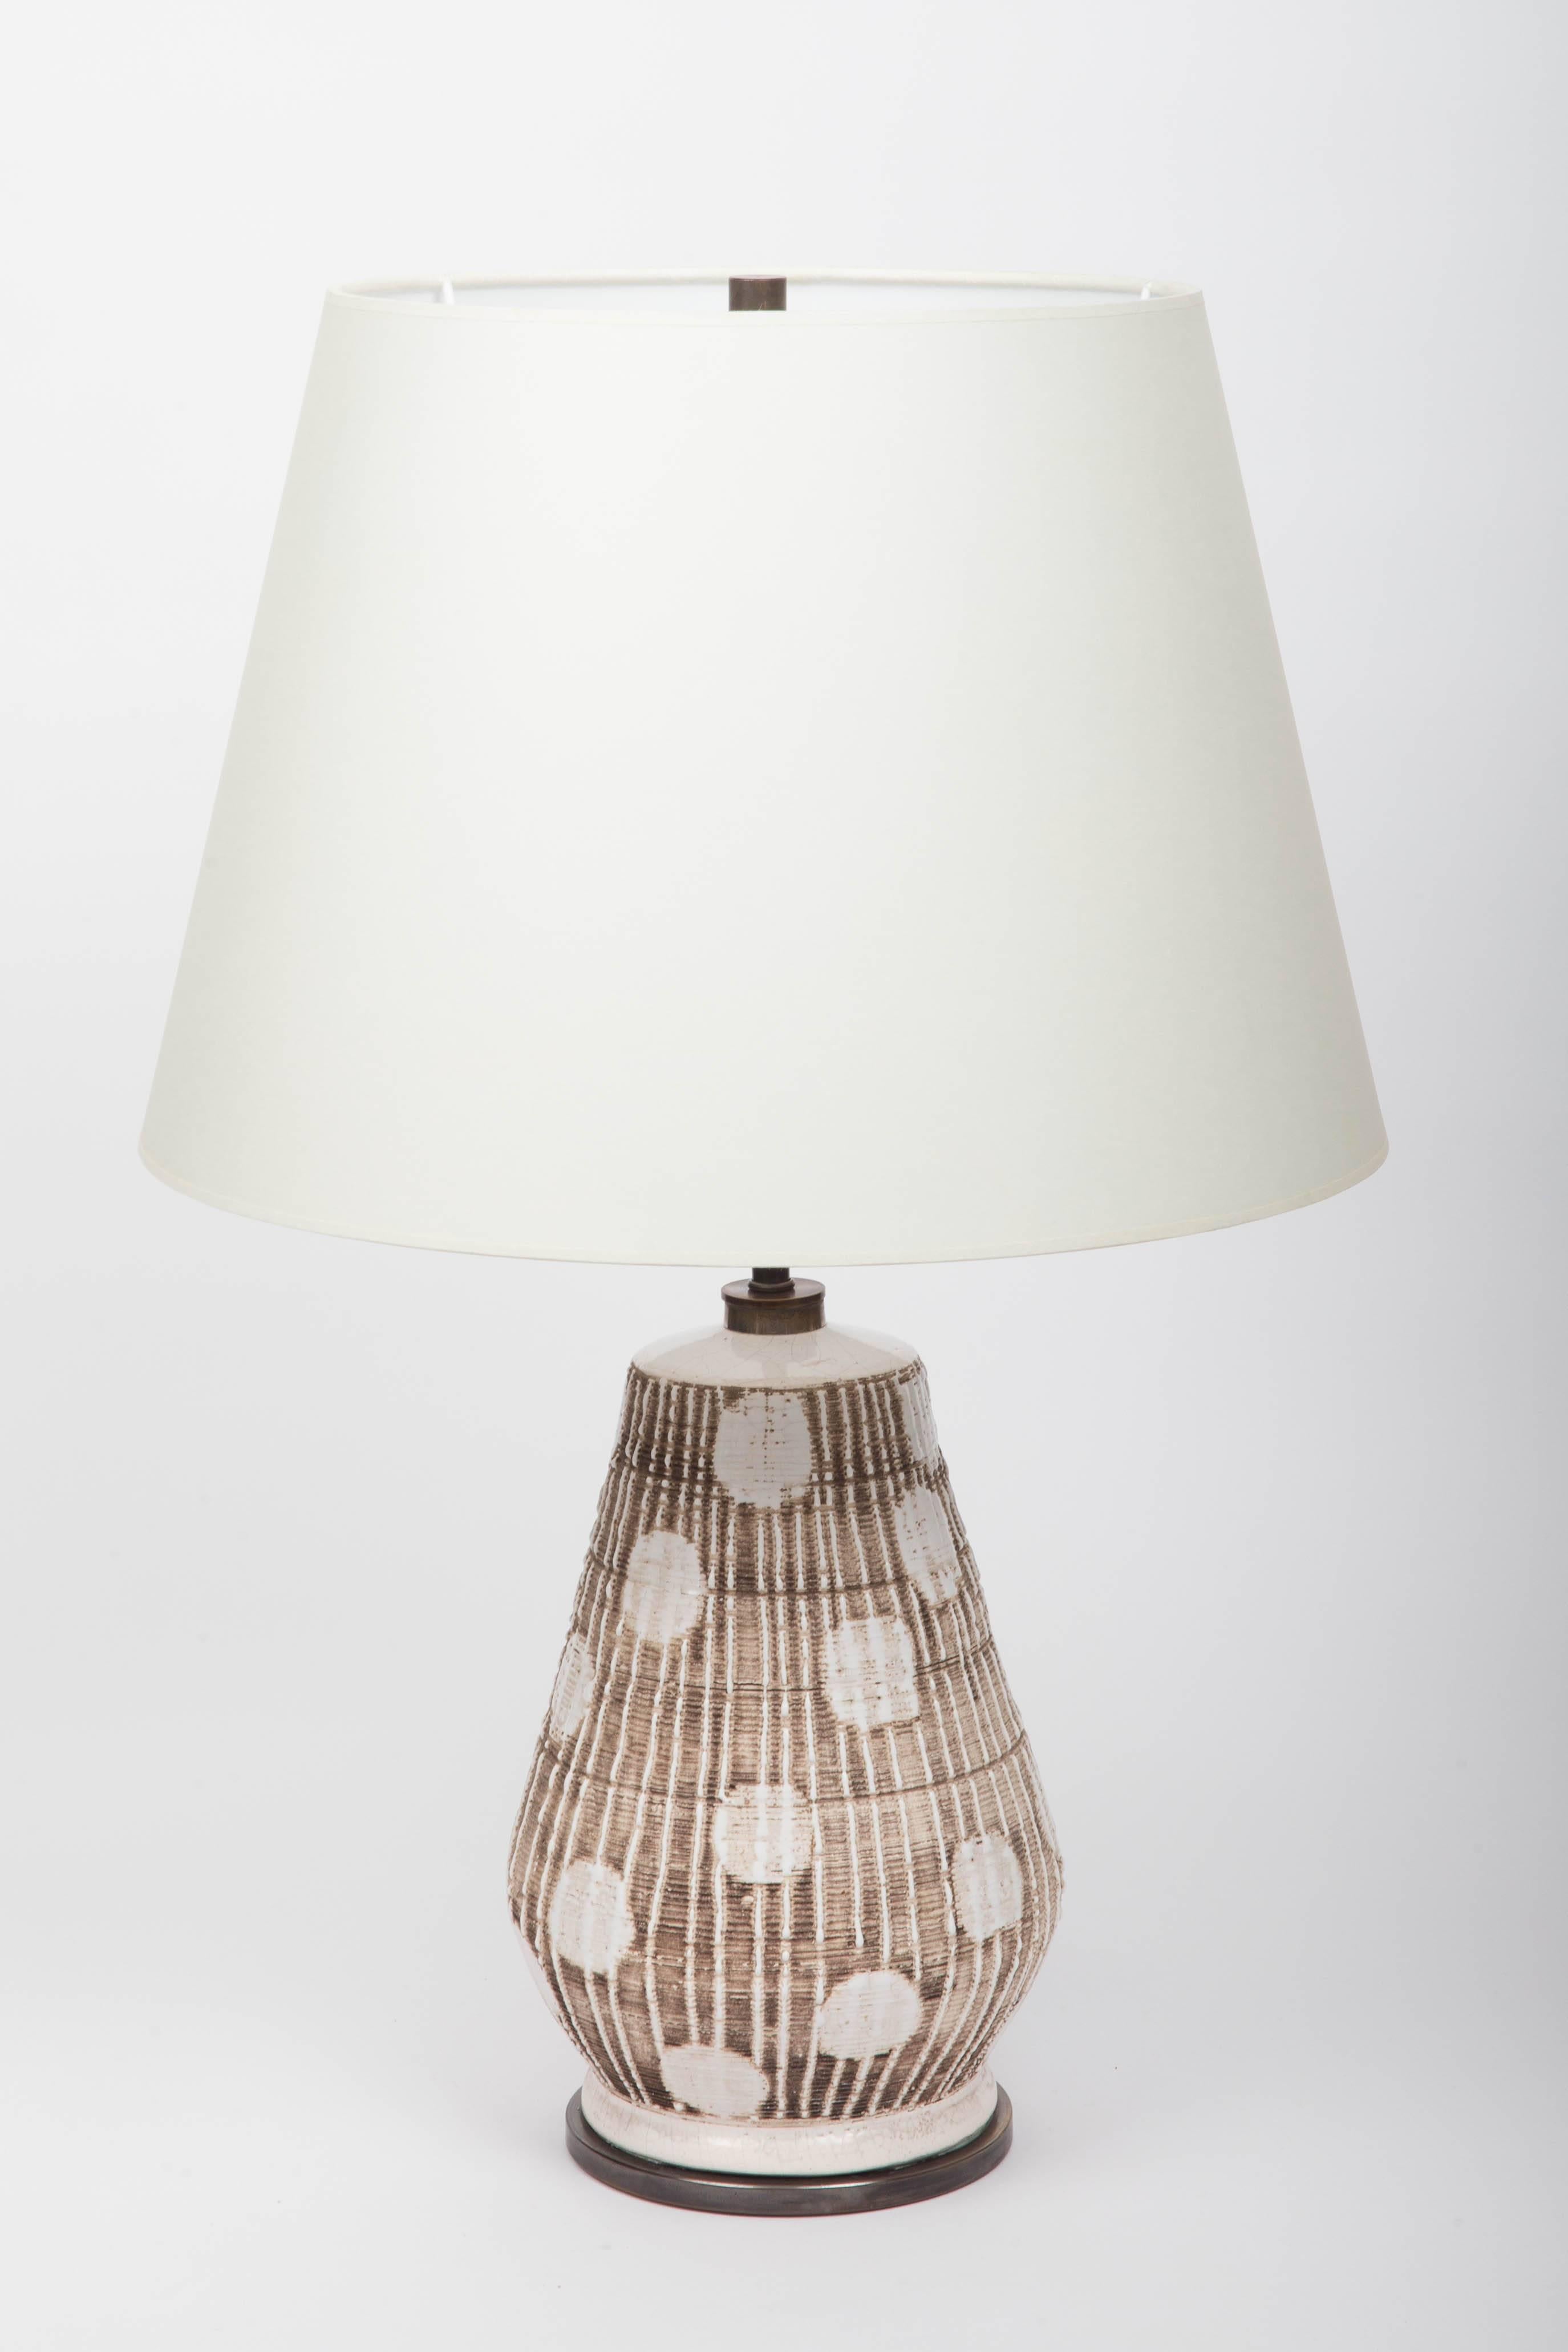 Ceramic table lamp in brown and white with graphic dots, 
France 20th century.

Shade not included
Newly rewired with black twisted silk cord and bronze finish on fittings.